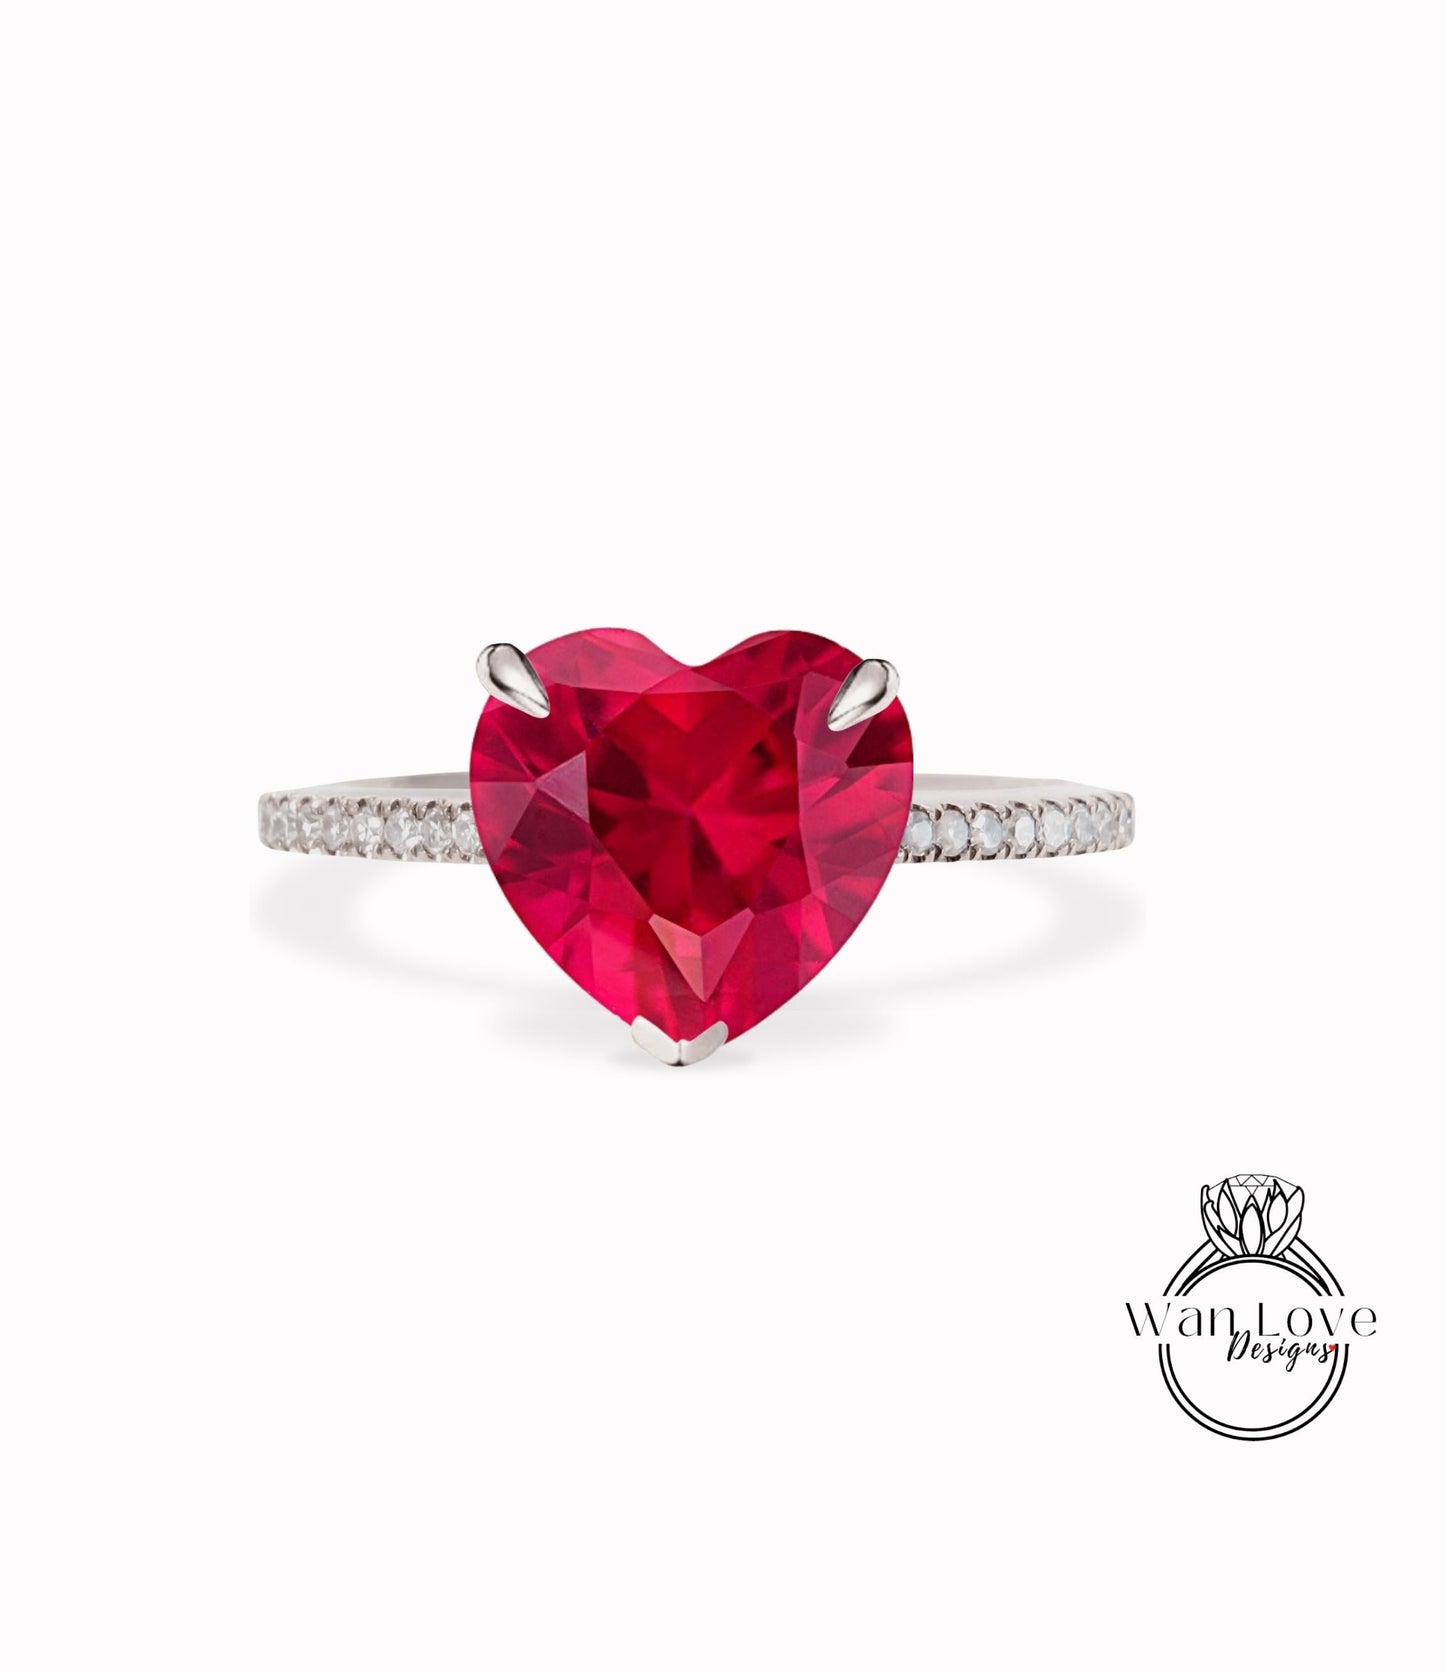 Heart cut Ruby Ring Heart Shaped Celebrity Engagement Ring 14k white Gold Ring Women Anniversary Gift Ring Bridal Gift Ring Promise ring Wan Love Designs